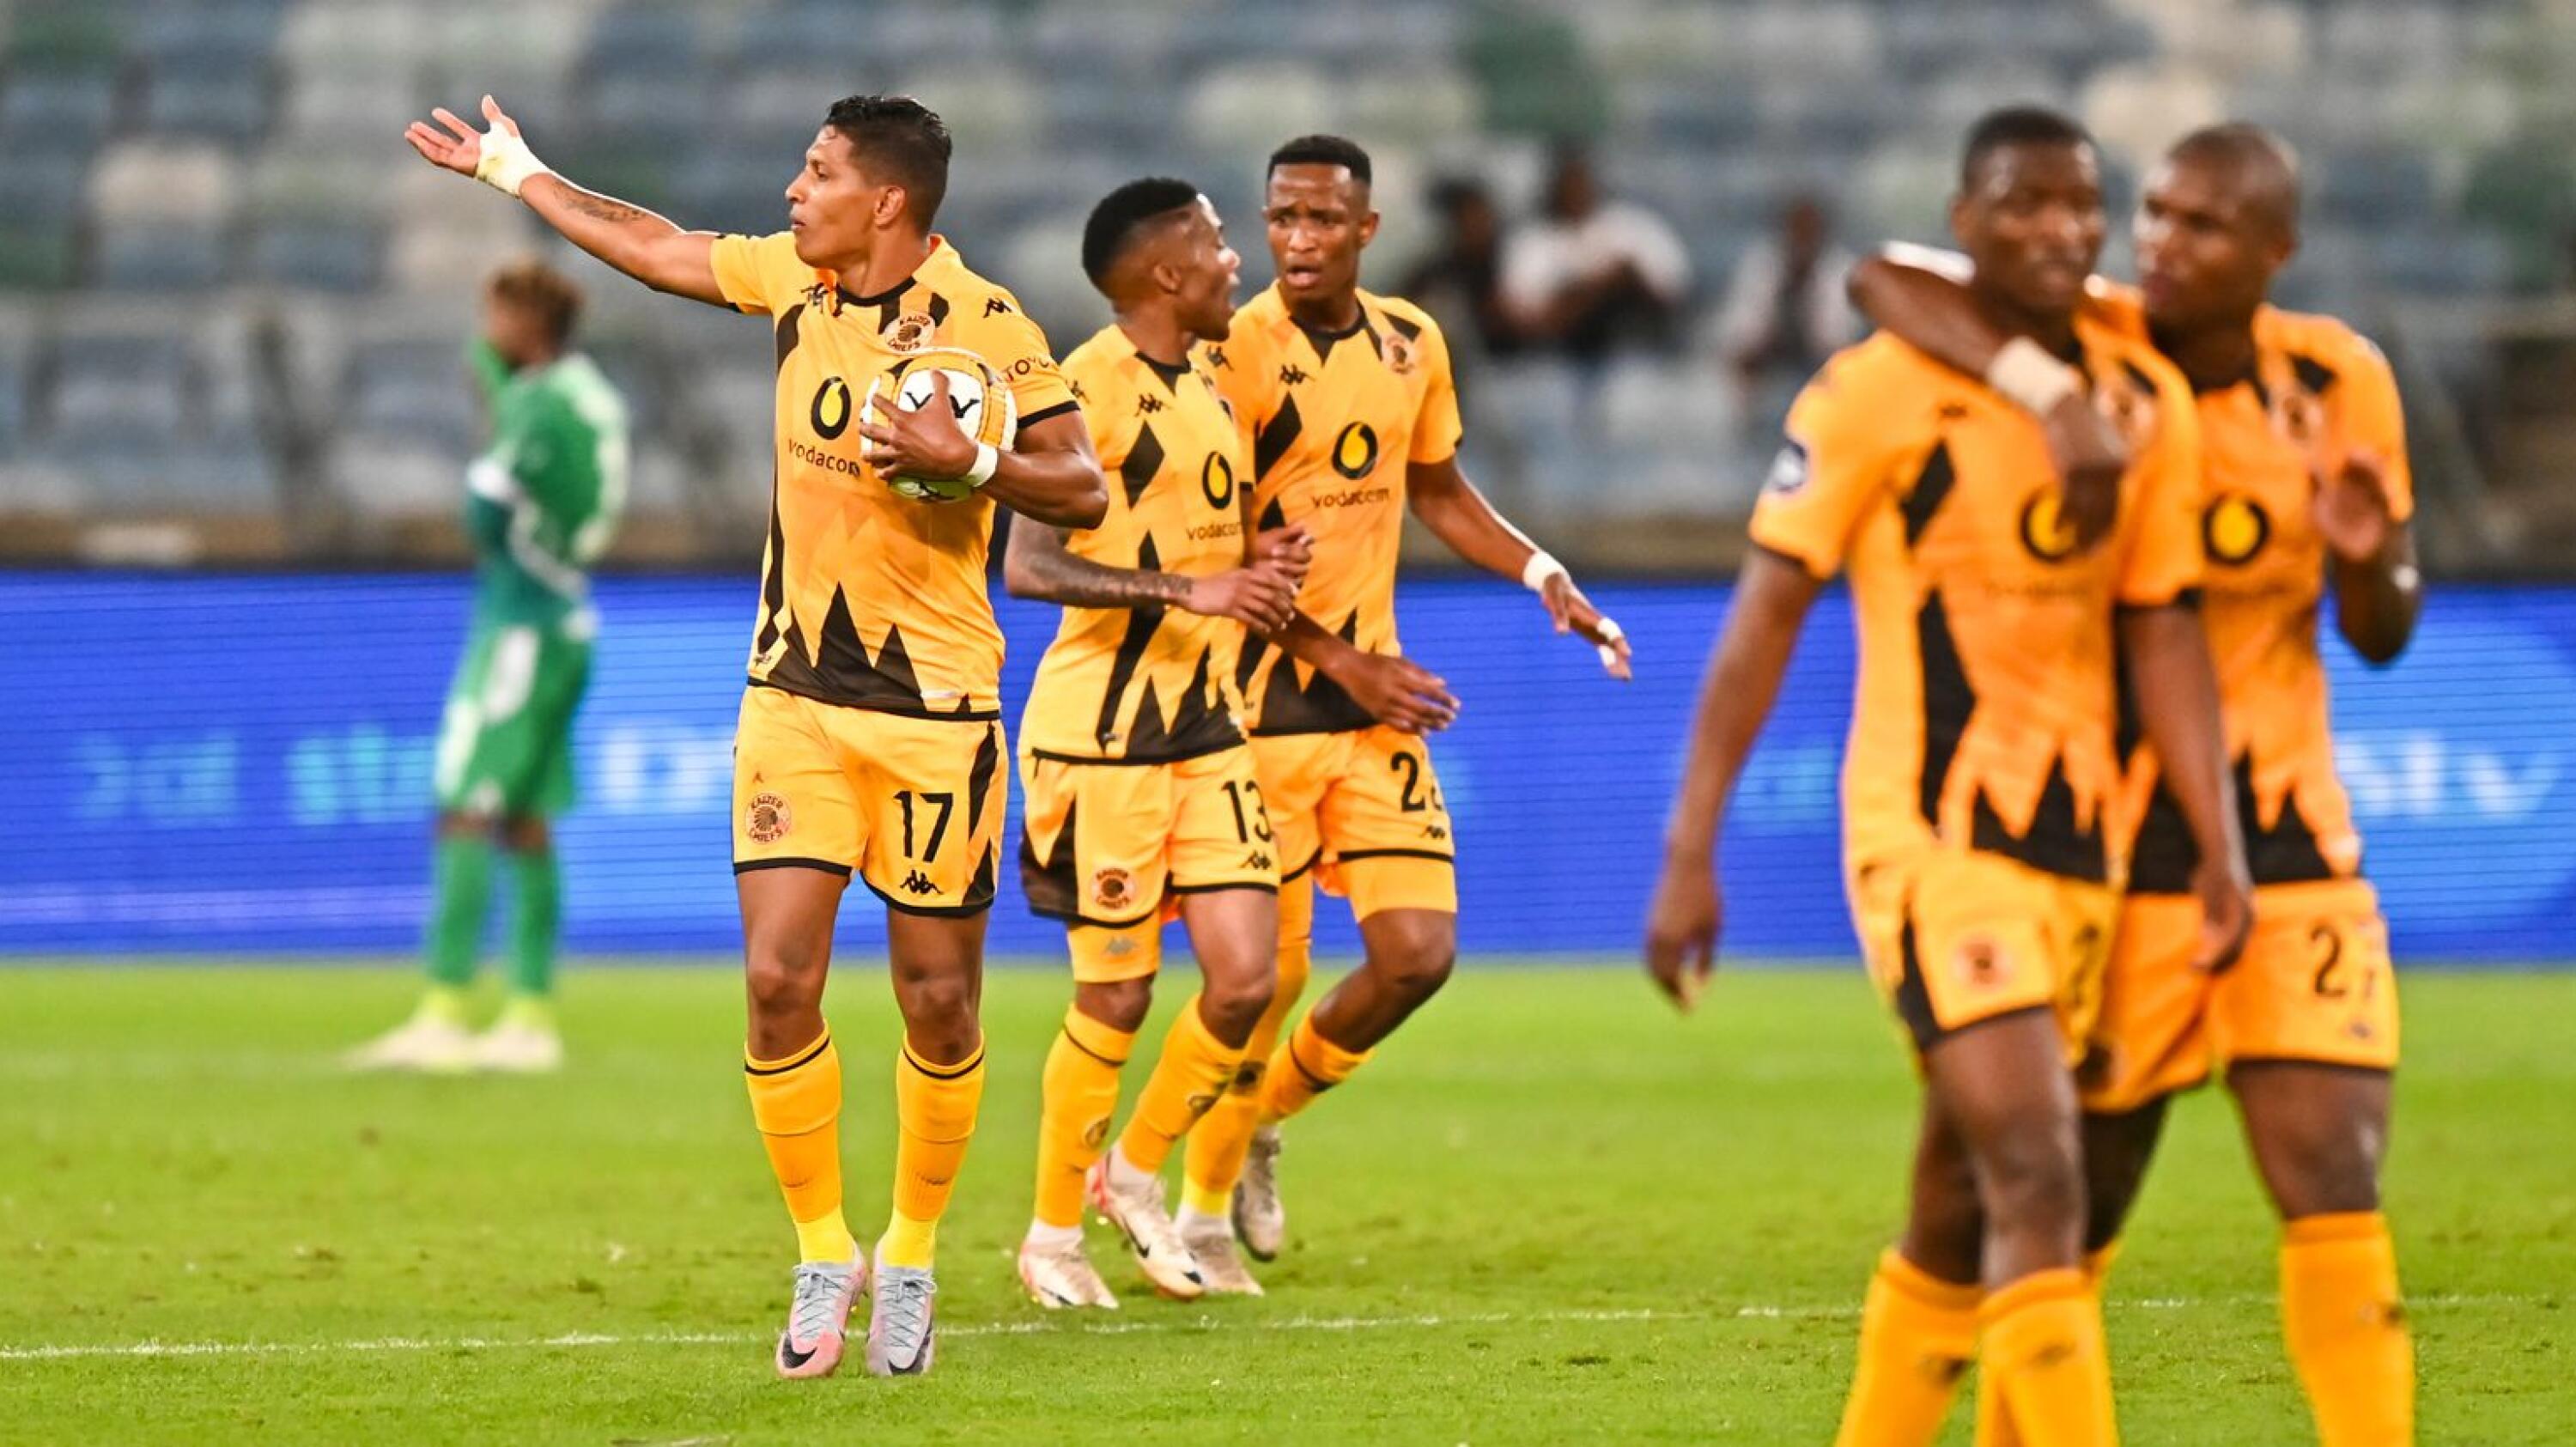 Kaizer Chiefs players celebrate a goal during their DStv Premiership game against Sekhukhune United